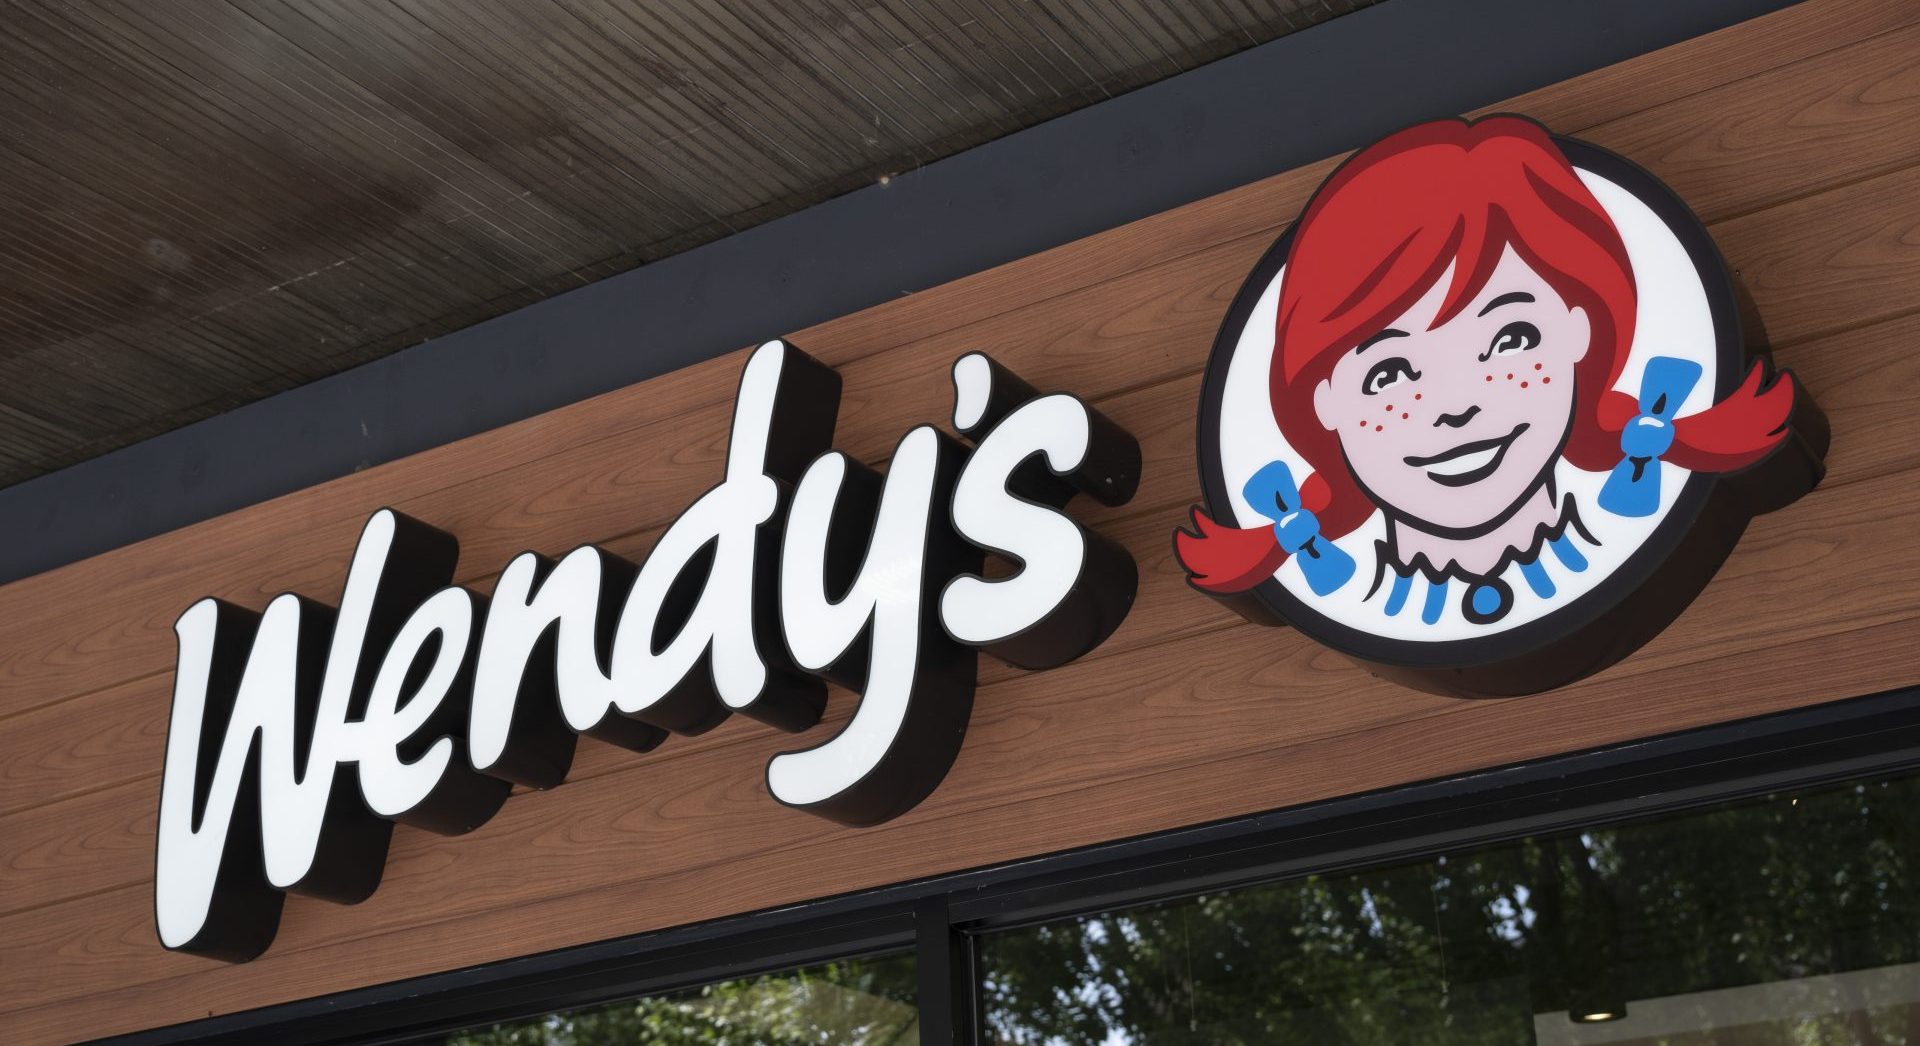 The CDC Discovers 13 Additional Cases Of Recent E. Coli Outbreak Linked Back To Wendy’s—New Total Of People Sickened Now Close To 100